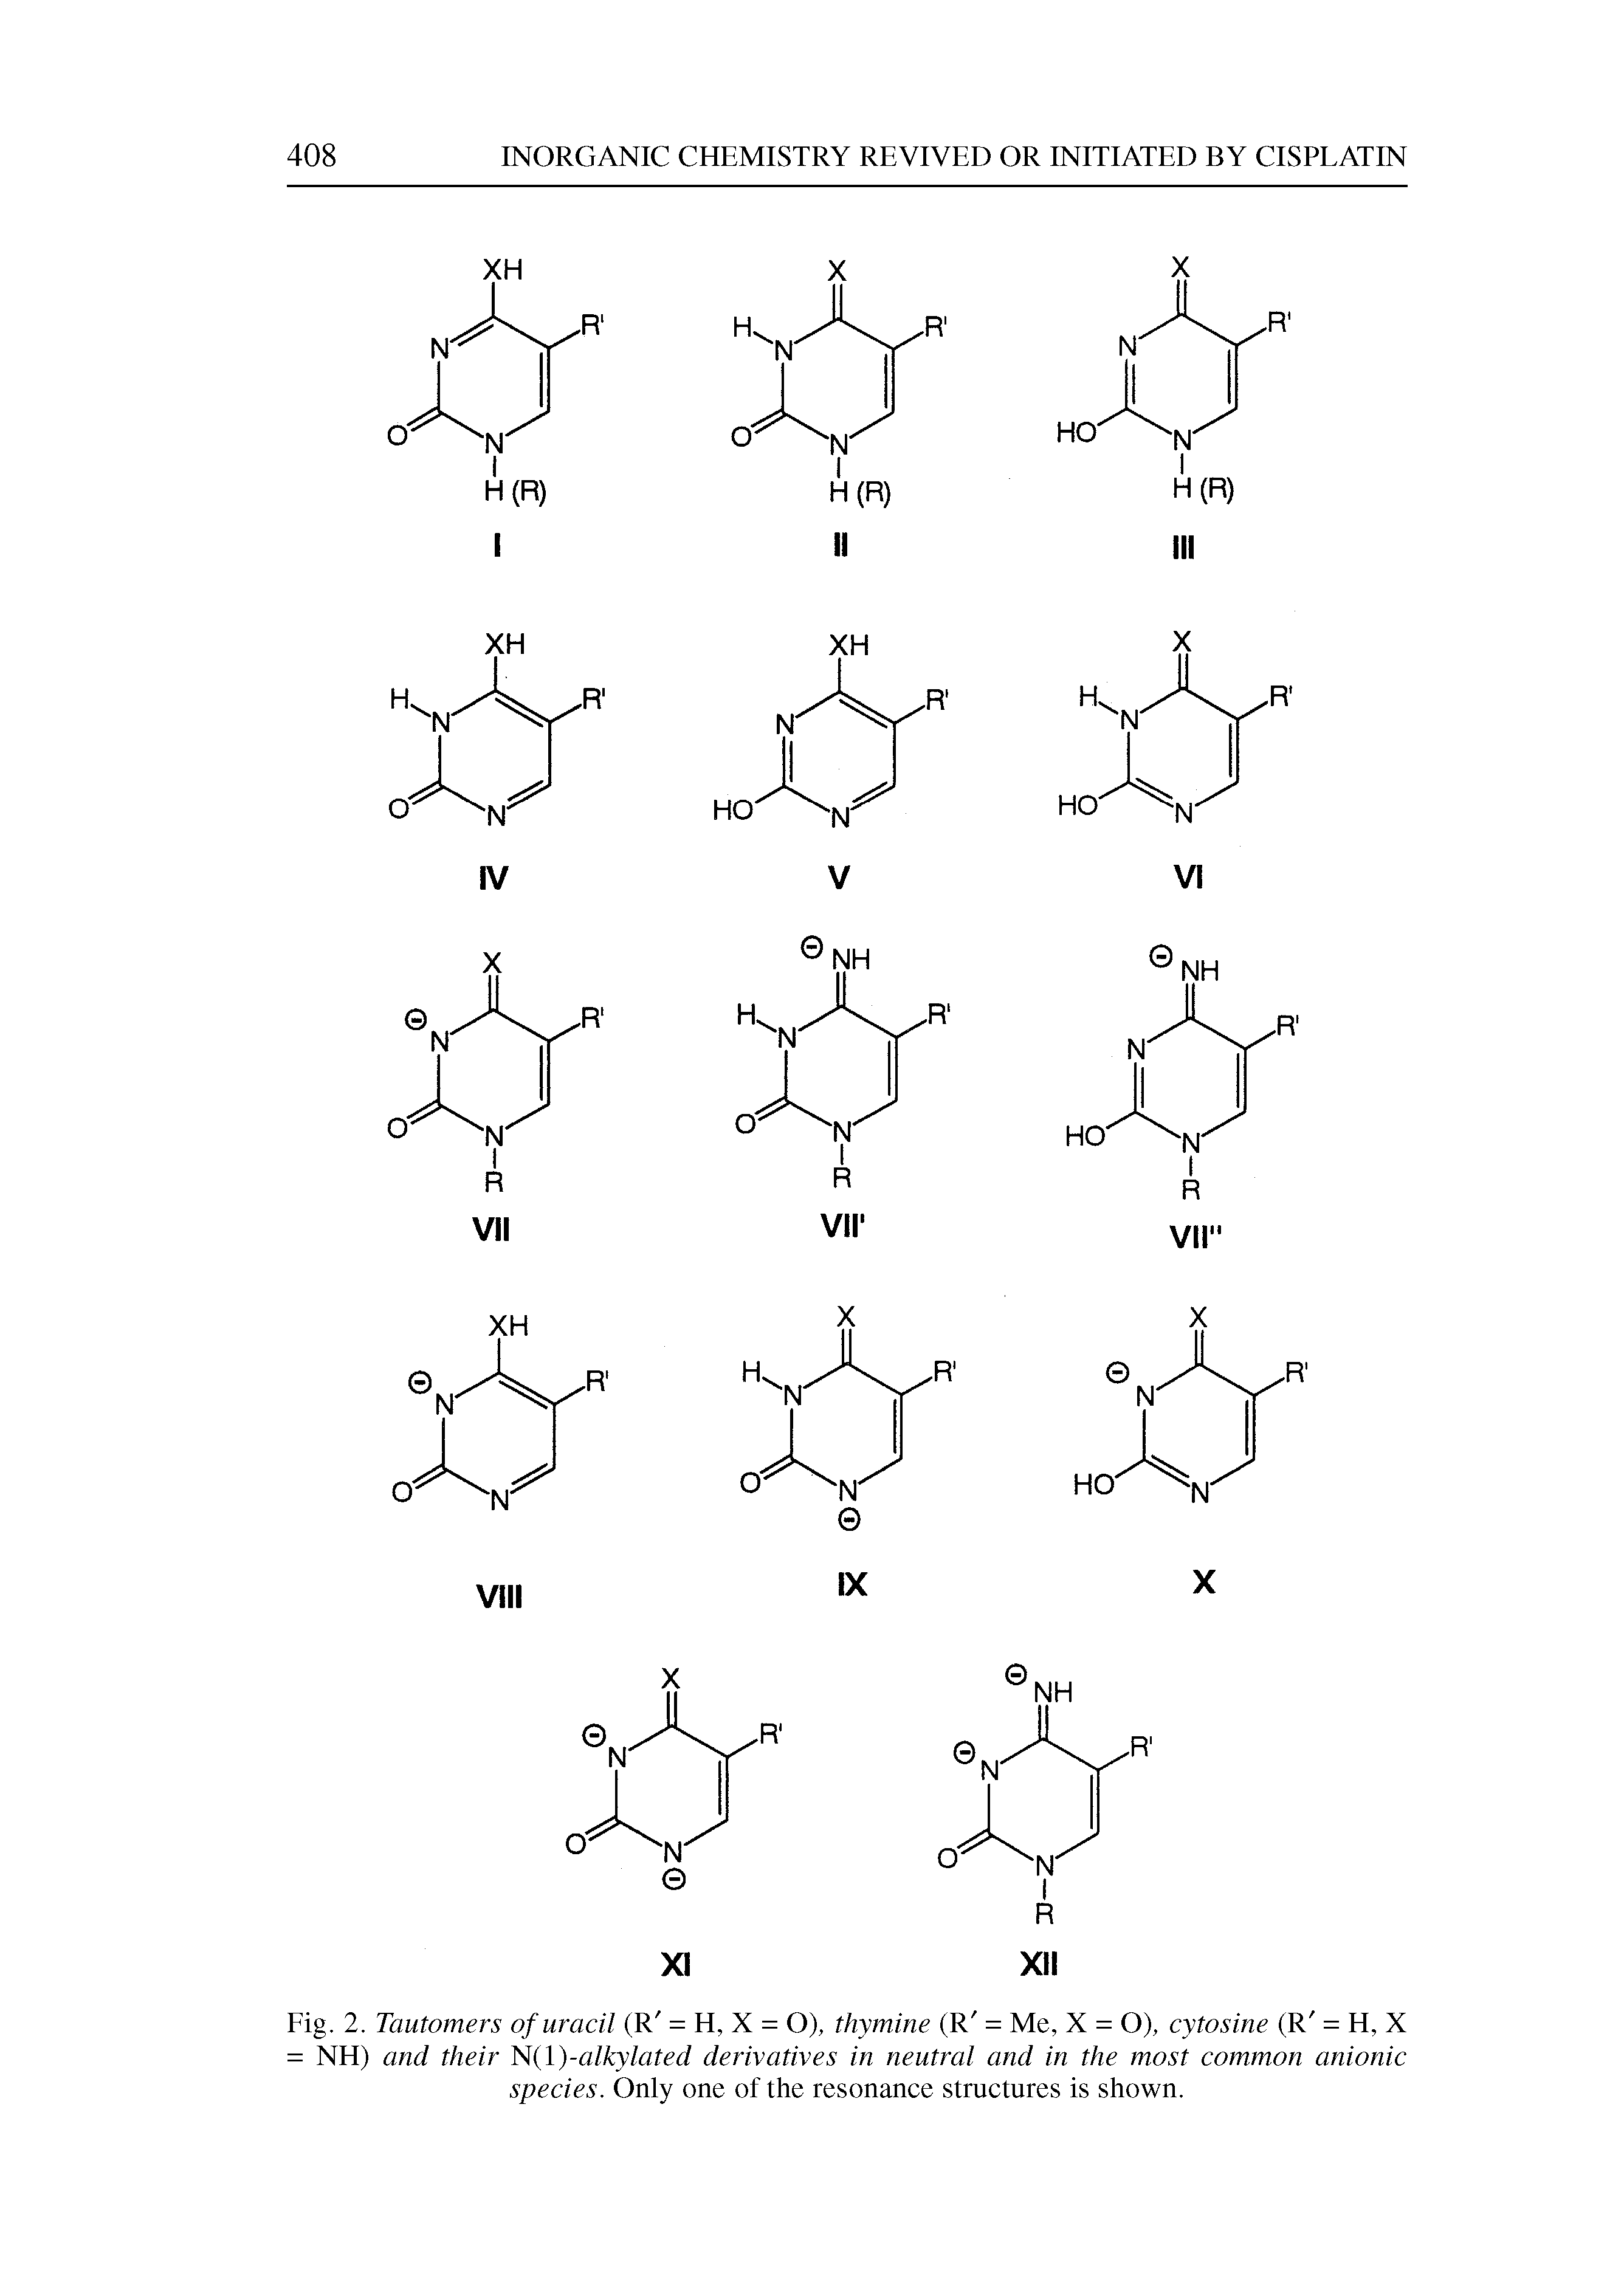 Fig. 2. Tautomers of uracil (R = H, X = O), thymine (R = Me, X = O), cytosine (R = H, X = NH) and their N(1 )-alkylated derivatives in neutral and in the most common anionic species. Only one of the resonance structures is shown.